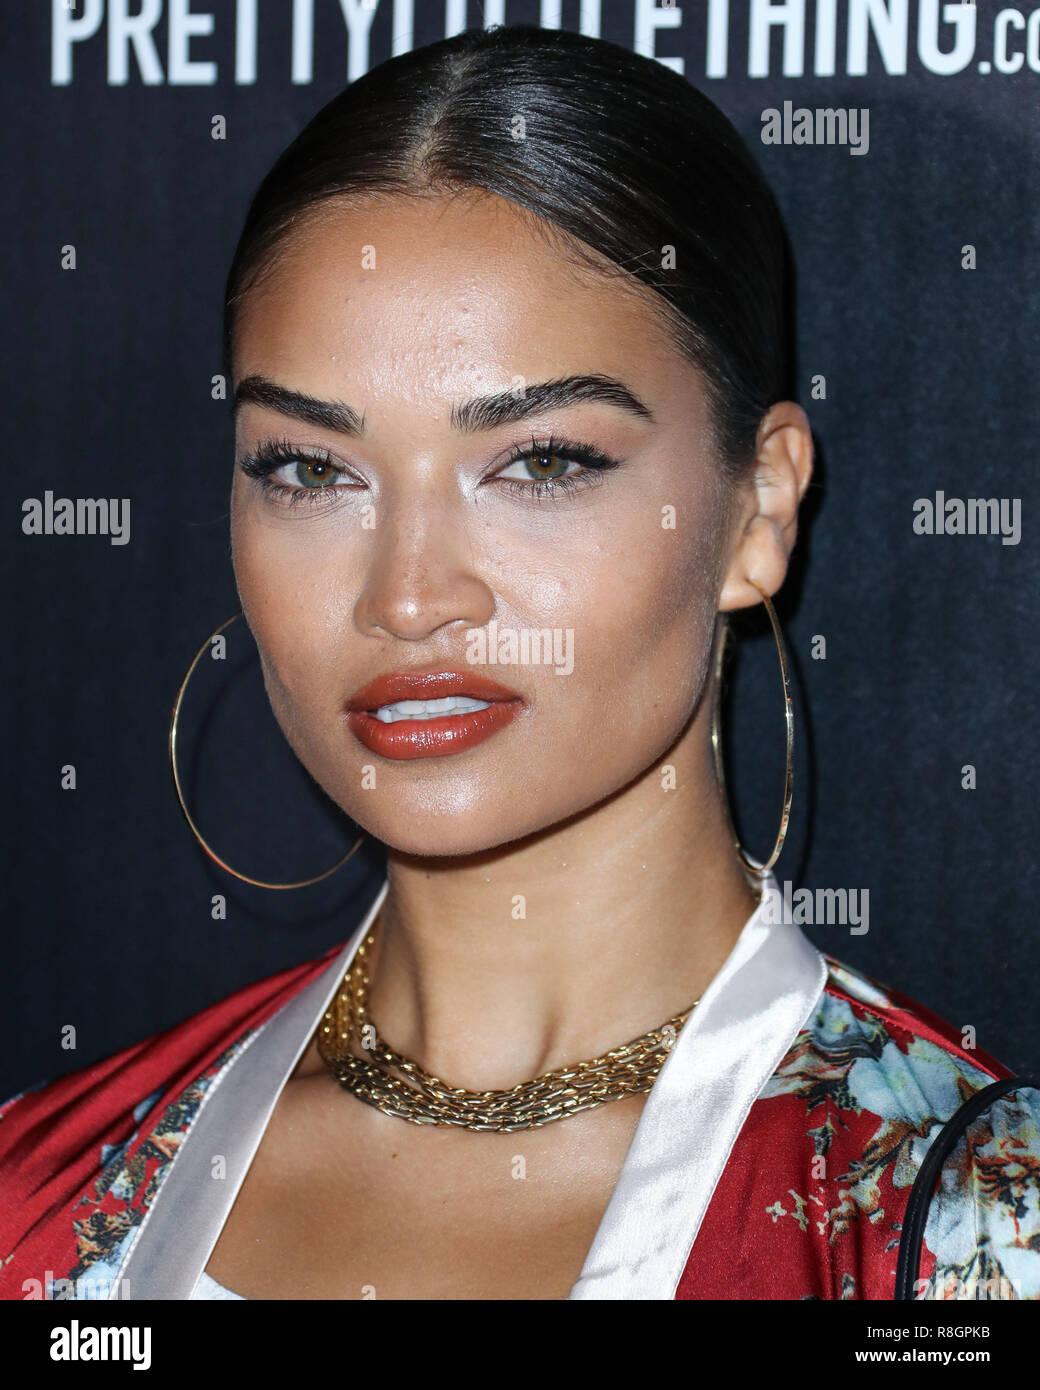 WEST HOLLYWOOD, LOS ANGELES, CA, USA - OCTOBER 25: Model Shanina Shaik  arrives at the PrettyLittleThing By Kourtney Kardashian Launch held at  Poppy on October 25, 2017 in West Hollywood, Los Angeles,